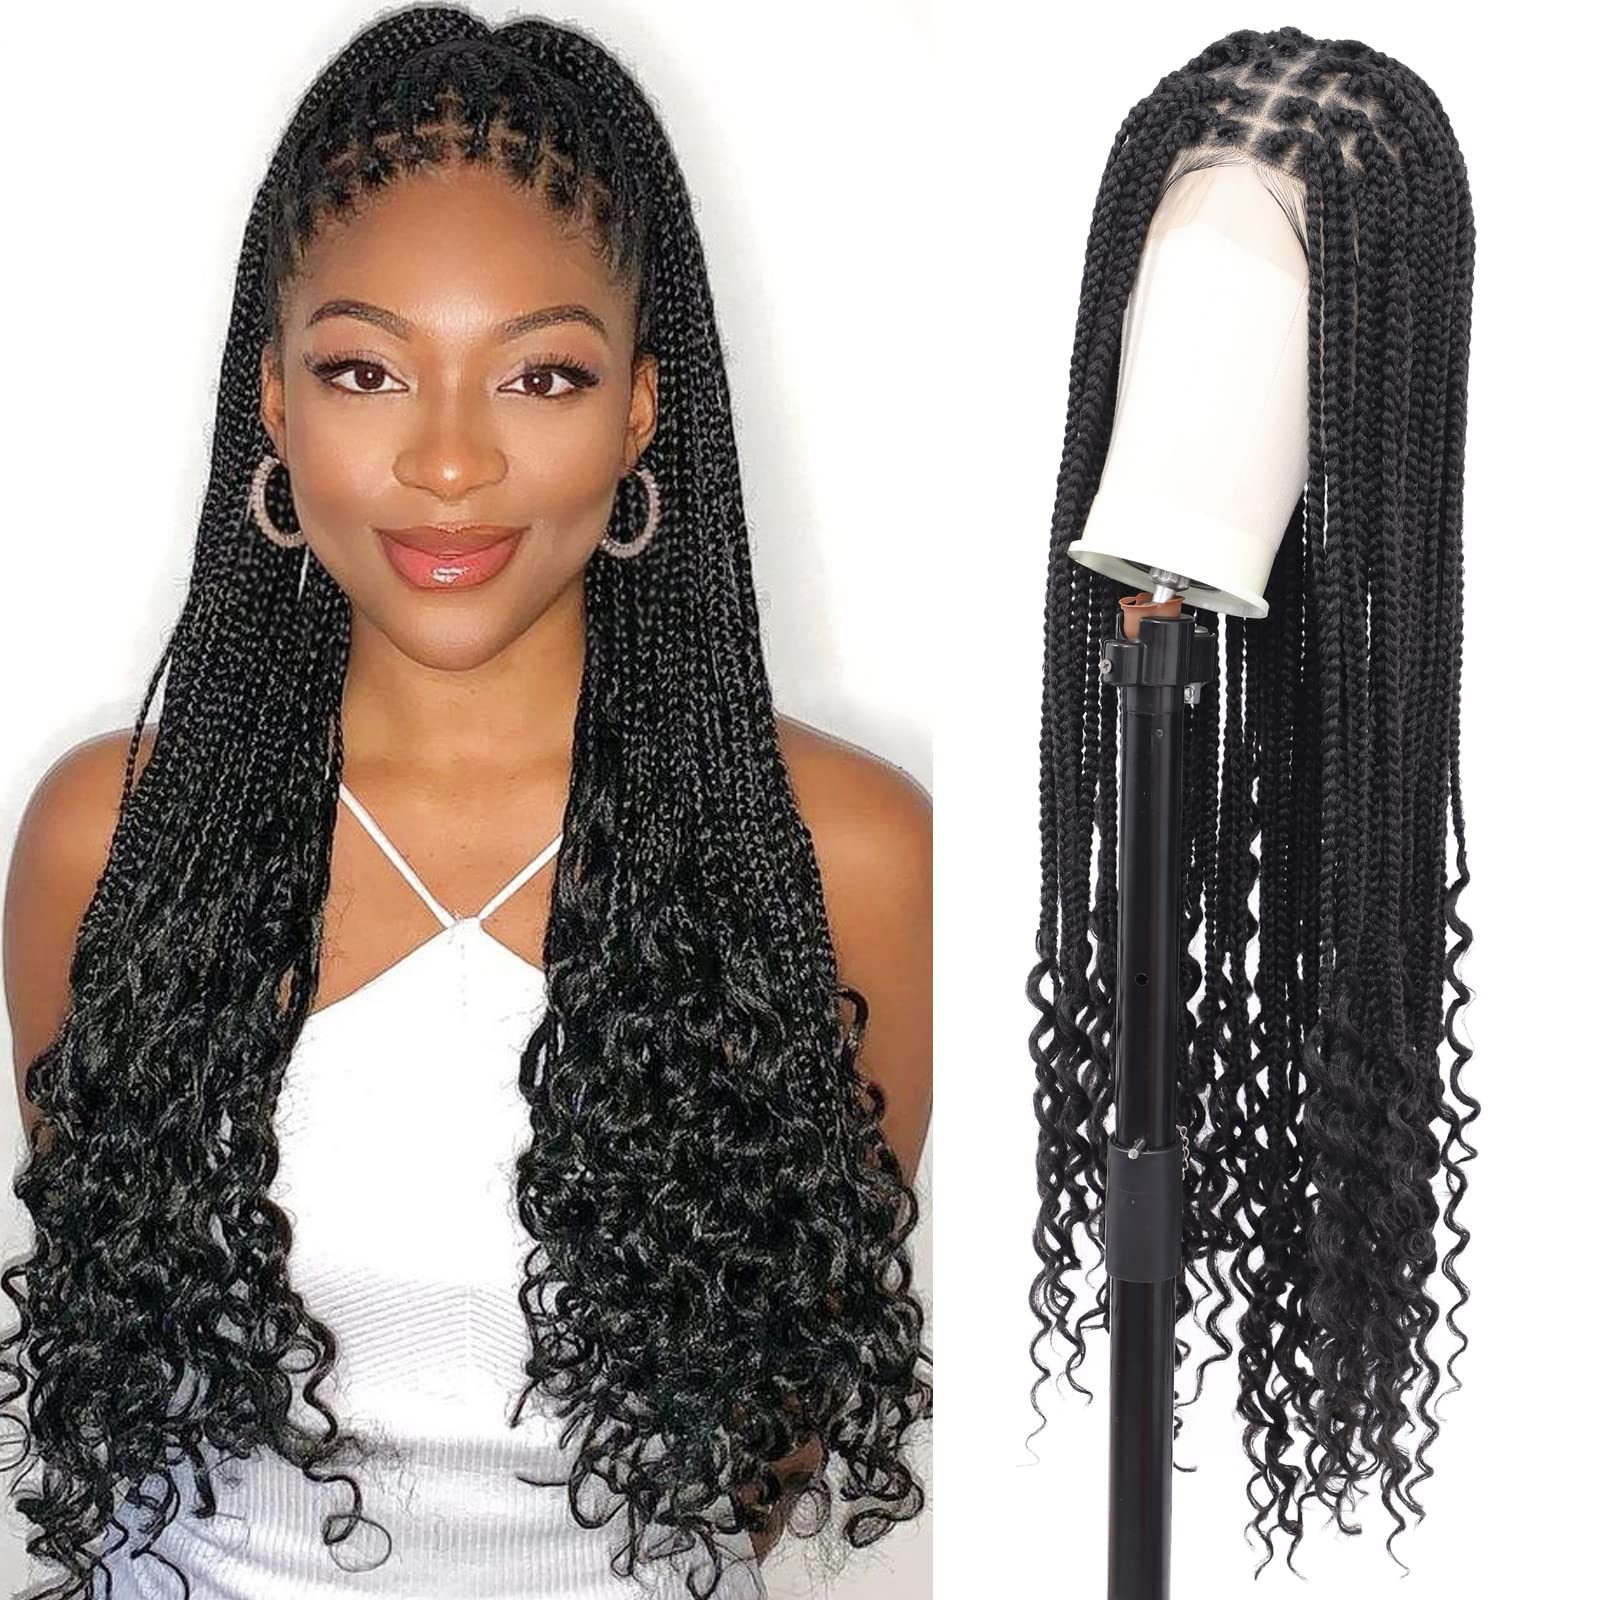 Fecihor 36 Full Double Lace Braided Wigs with Boho Curly Ends